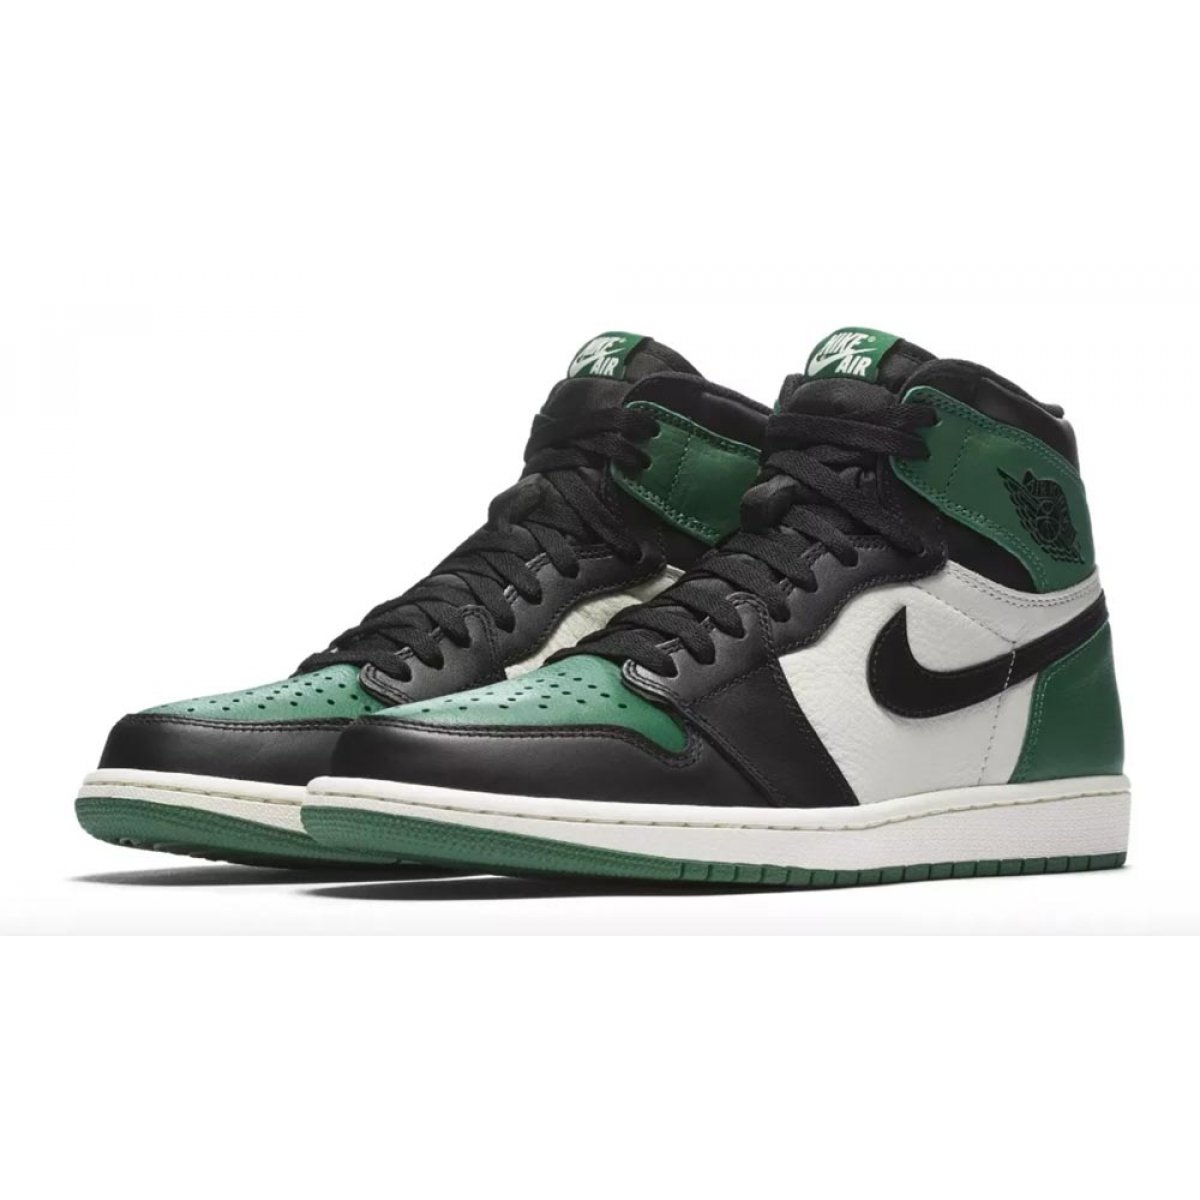 Nike Air Jordan 1 High Pine Green 1.0 Pine Green/Sail-Black - Fast delivery  | Spartoo Europe ! - Shoes High top trainers 160,00 €